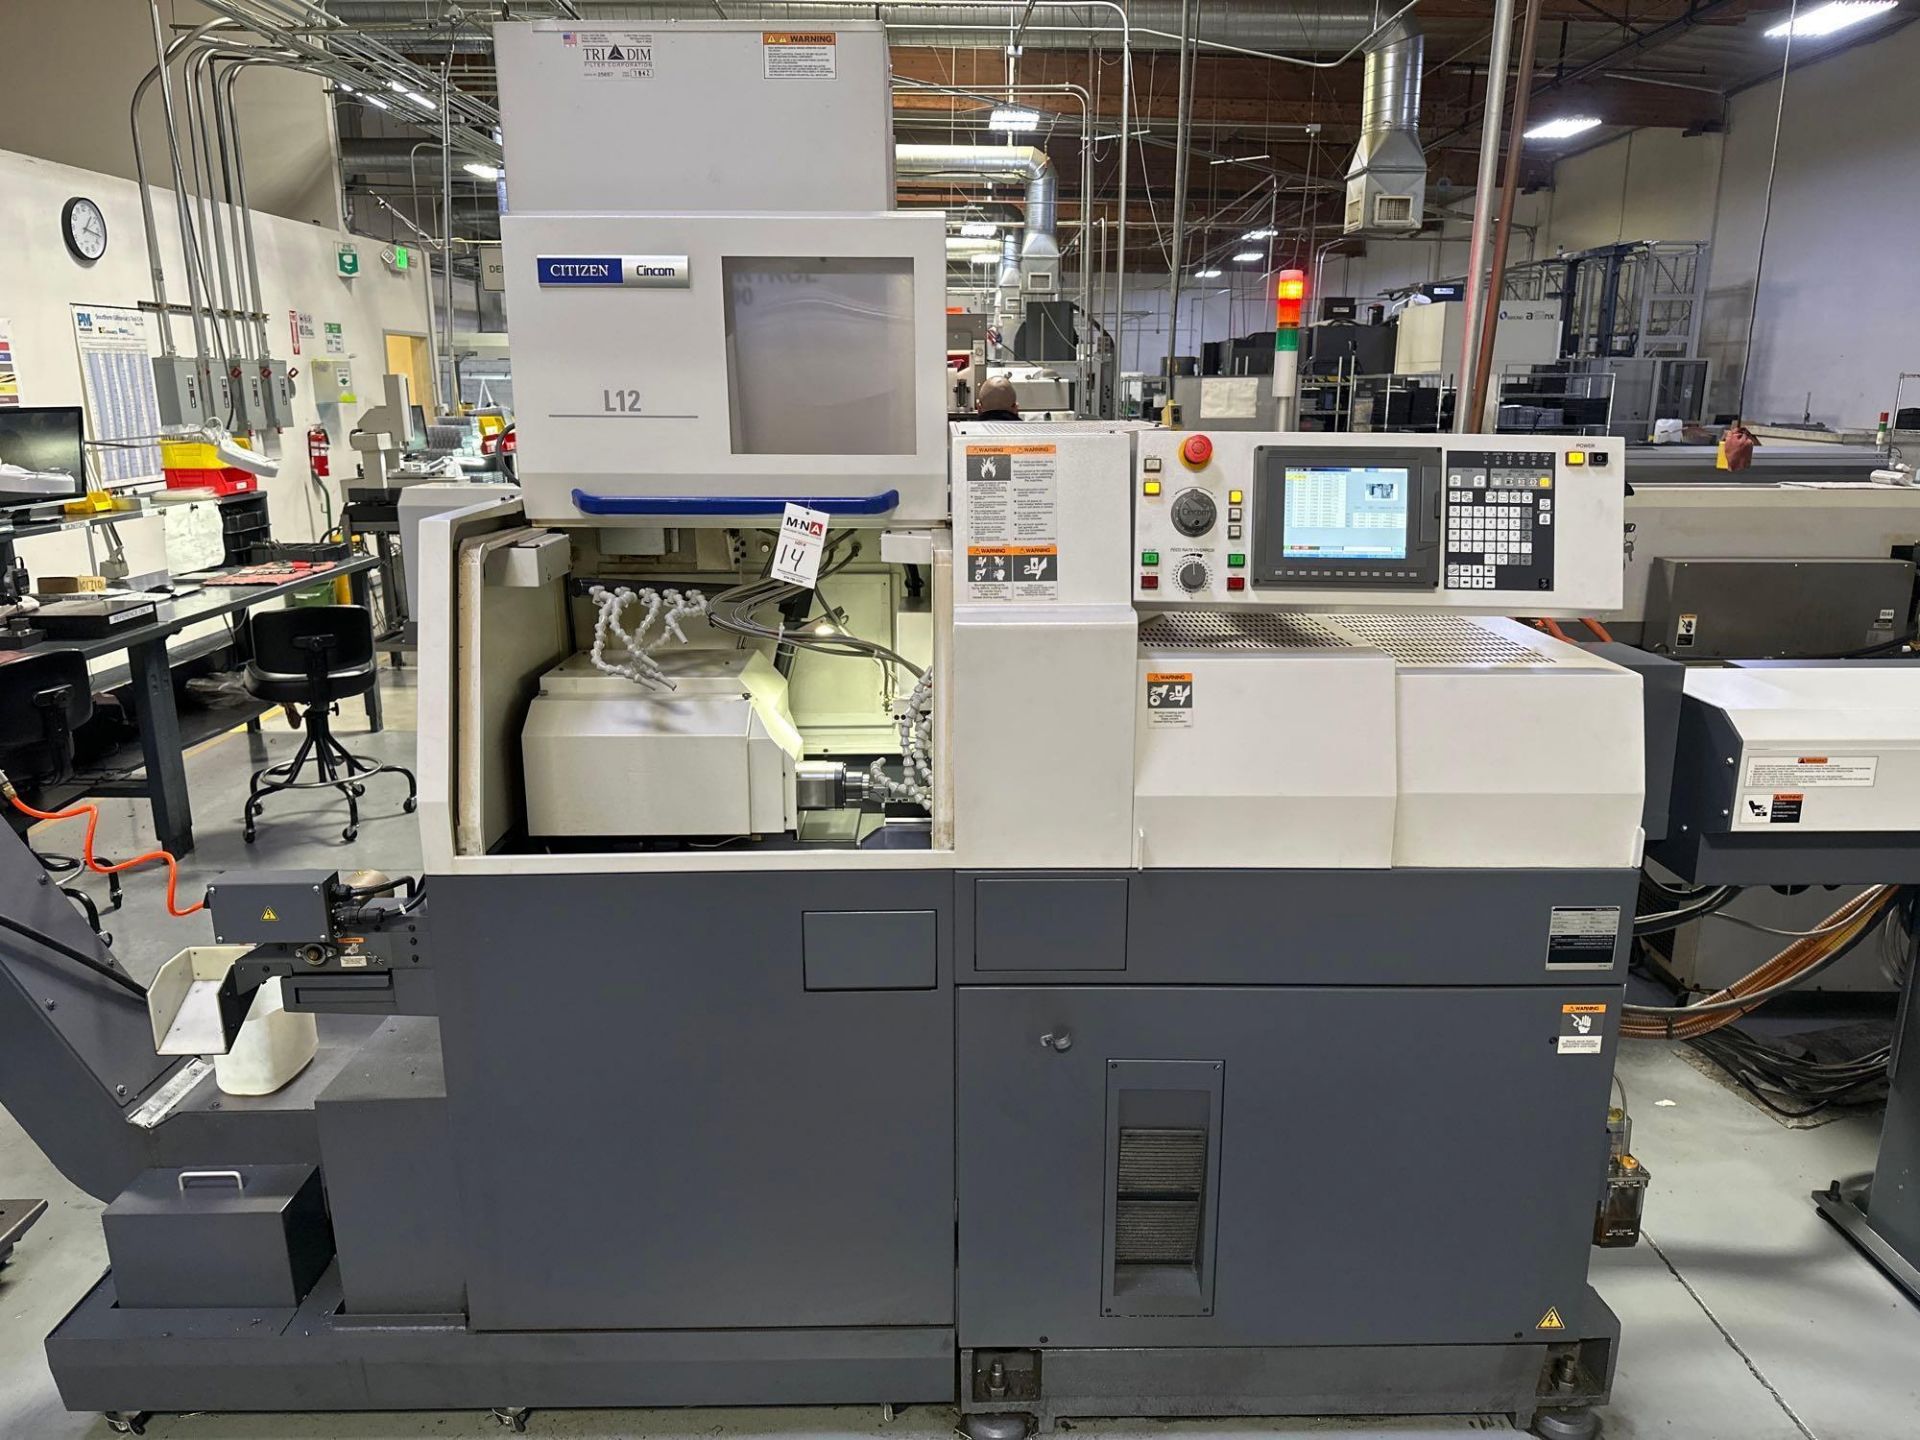 Citizen L12-1M7 6-Axis Swiss CNC Lathe, 18 Station Tool Holders *Delayed for sale in July* - Image 4 of 14